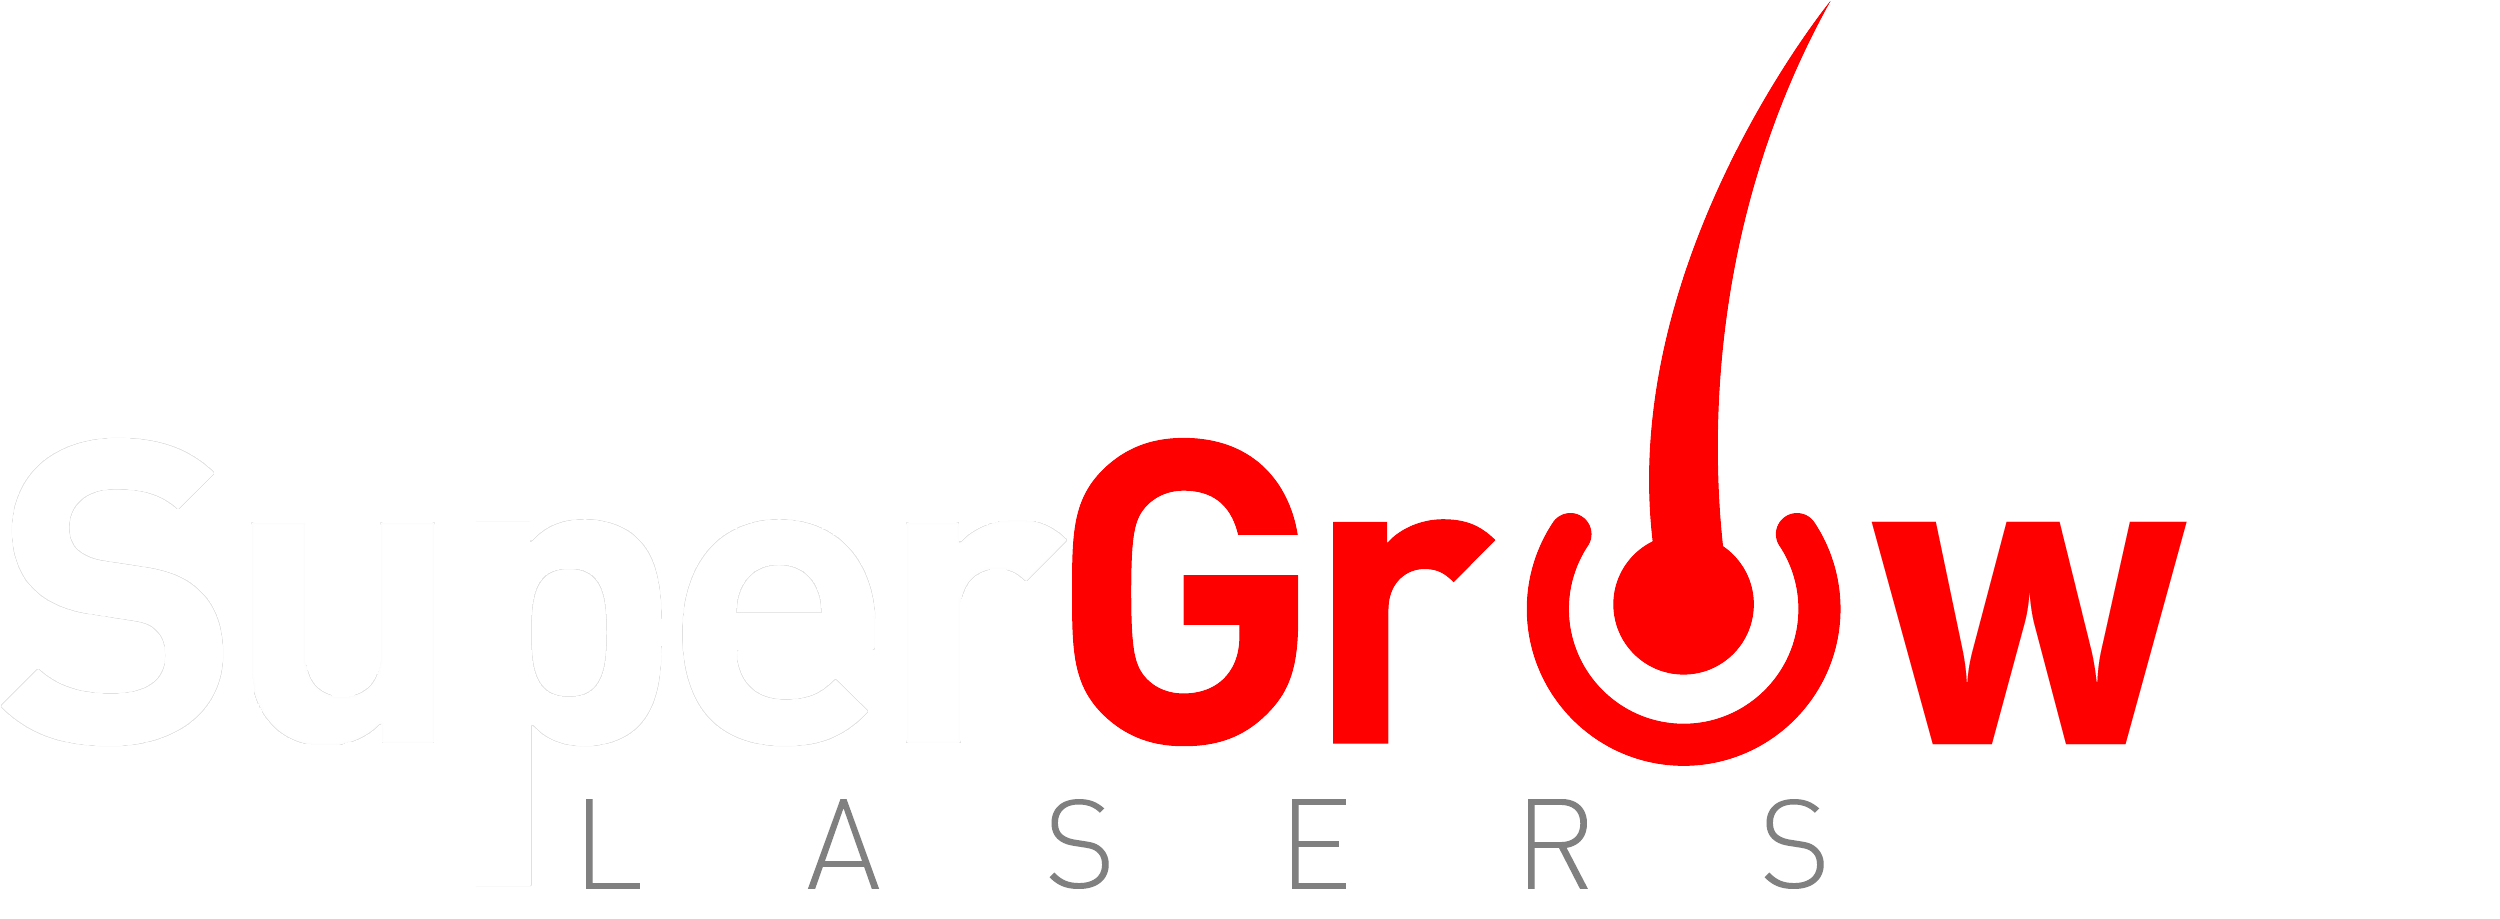 Super Grow Lasers